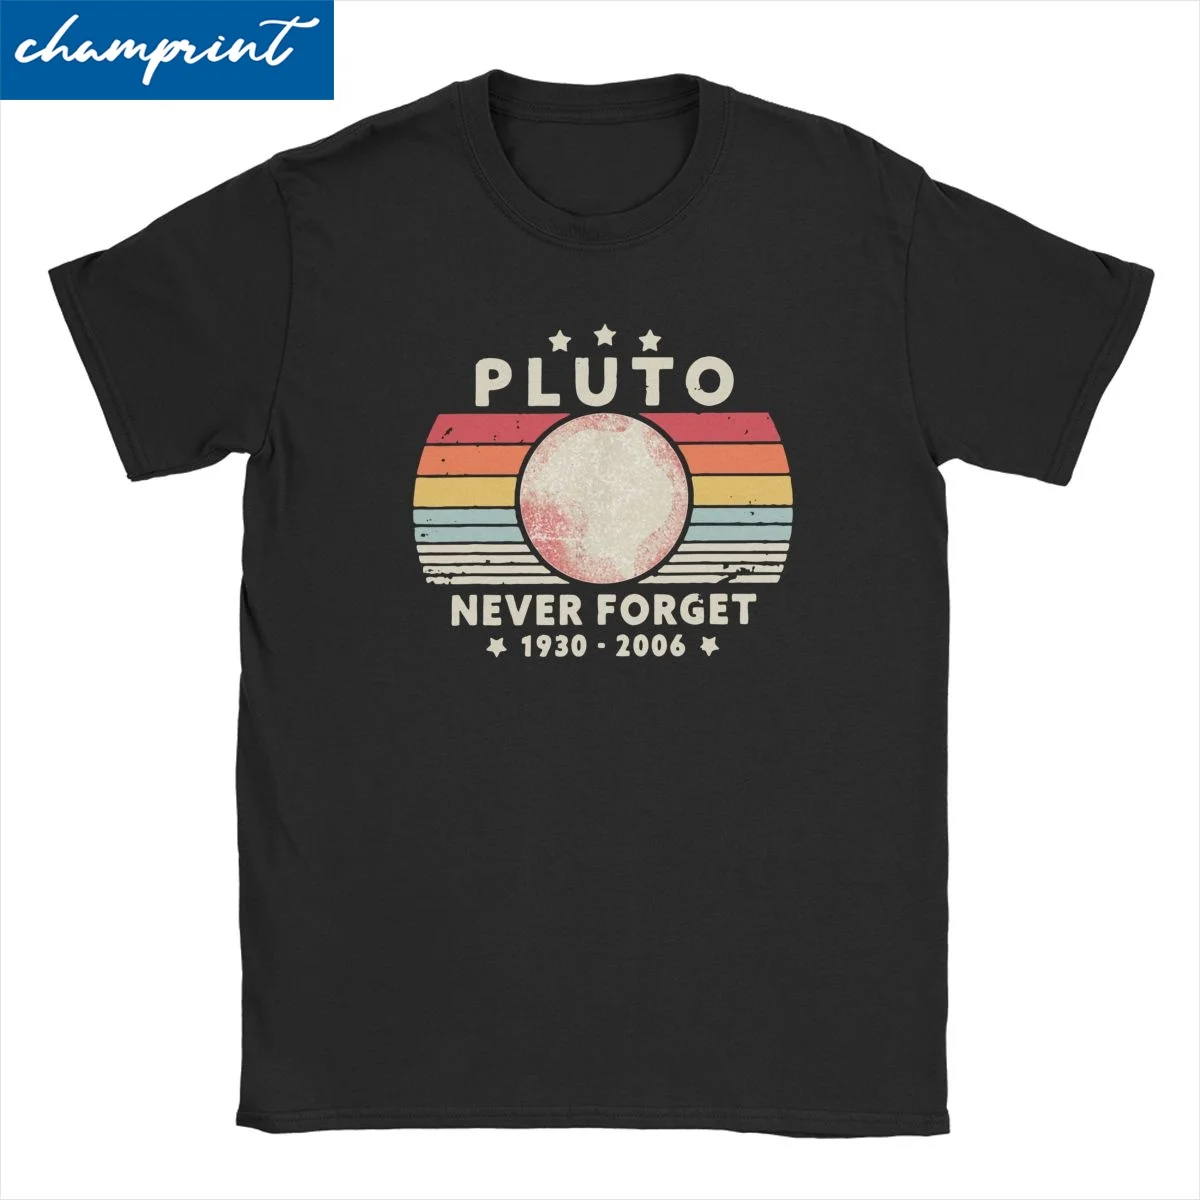 

Never Forget Pluto T Shirts Men Women's Cotton Vintage T-Shirt Retro Style Funny Space Science Planet Astronomy Tees Big Size